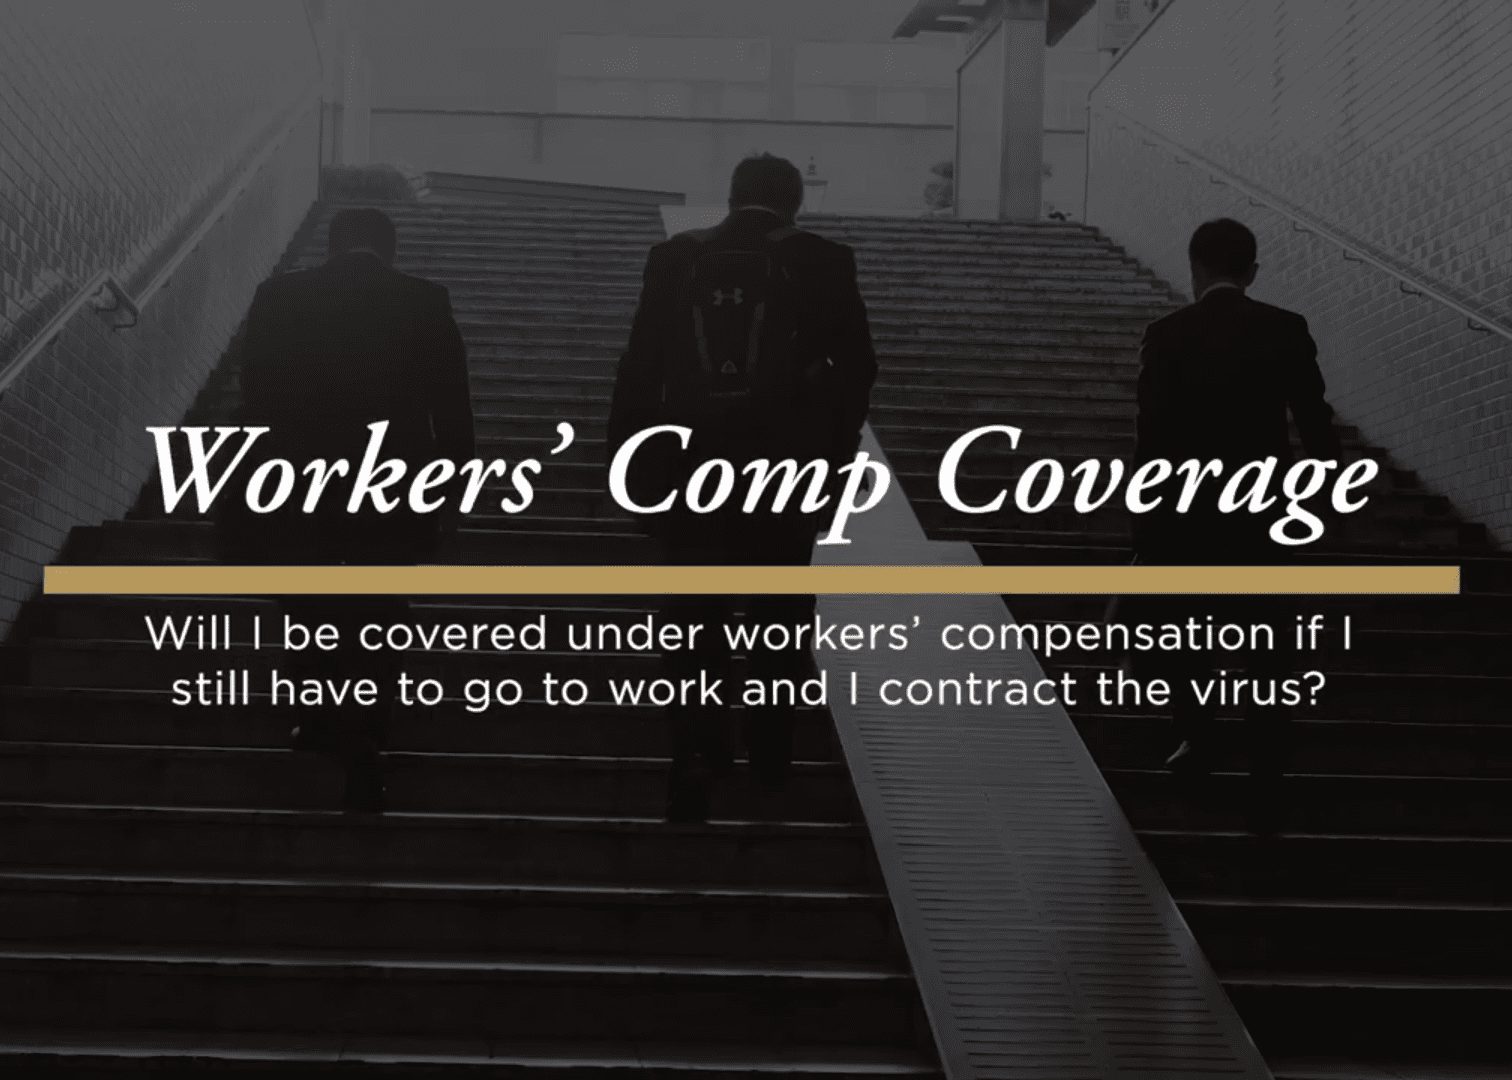 Will I be covered under workers' compensation if I still have to go to work and I contract COVID-19?